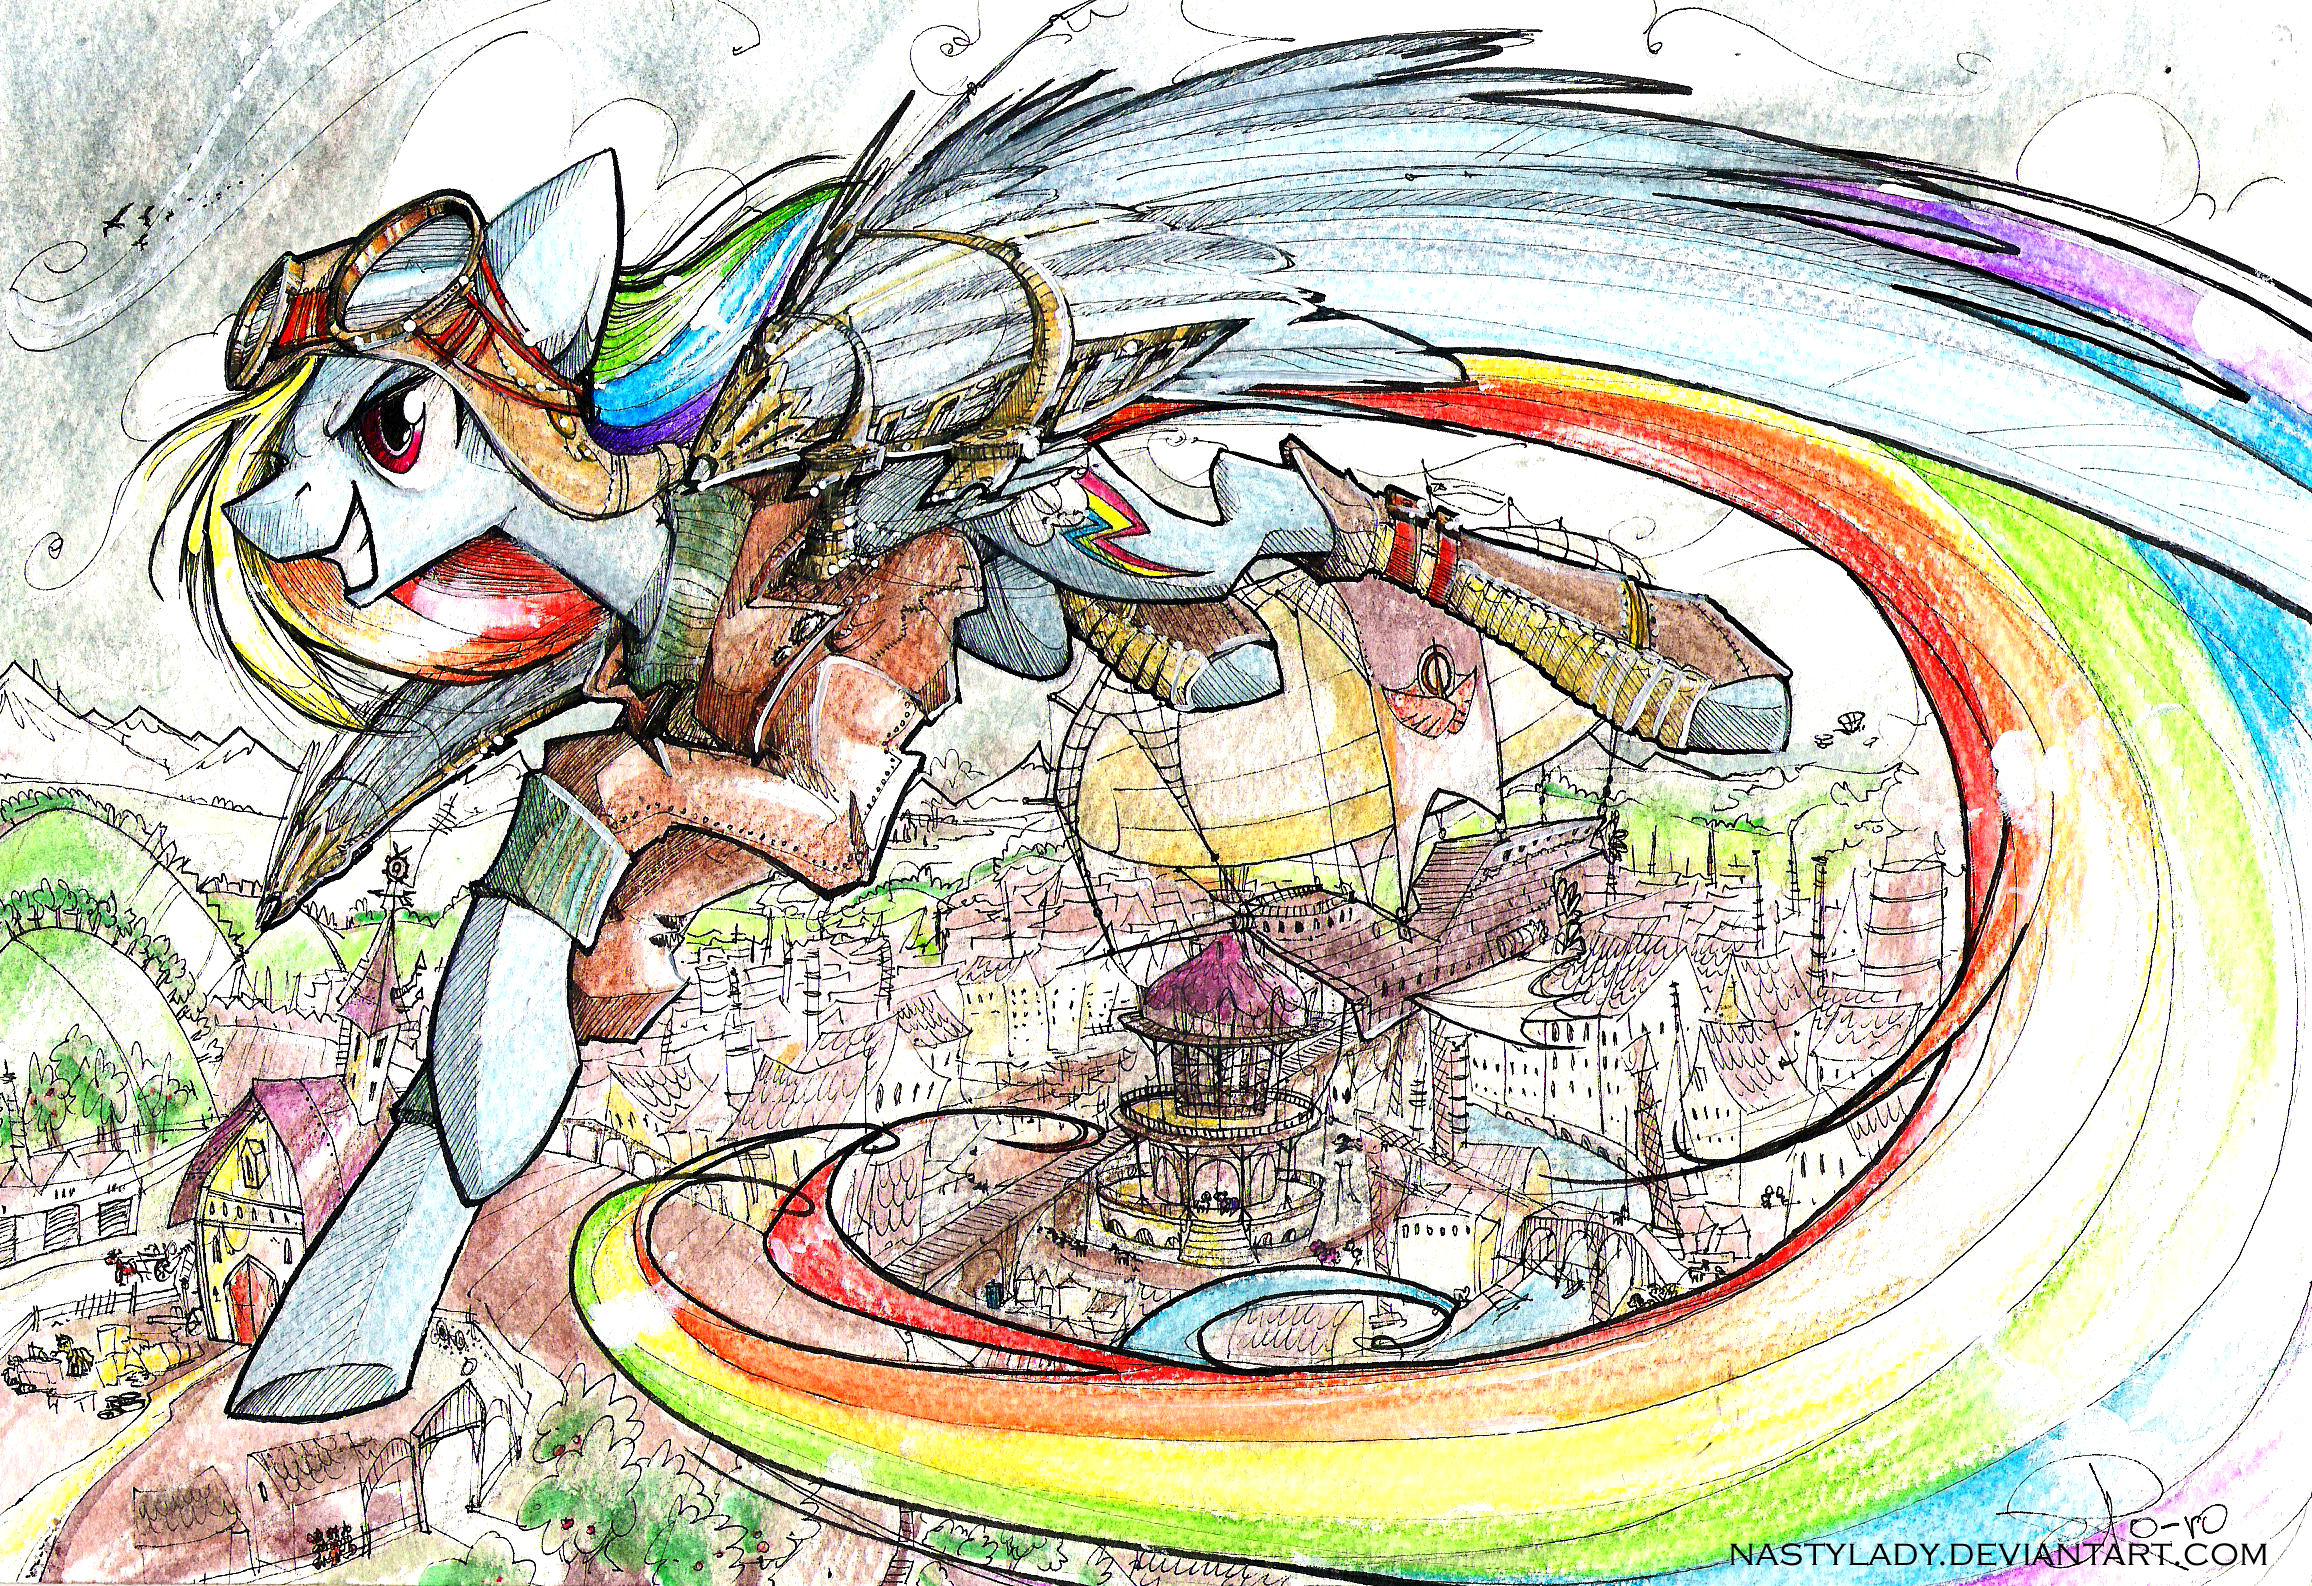 Steampunk Ponyville and Rainbow Dash Flying By by NastyLady